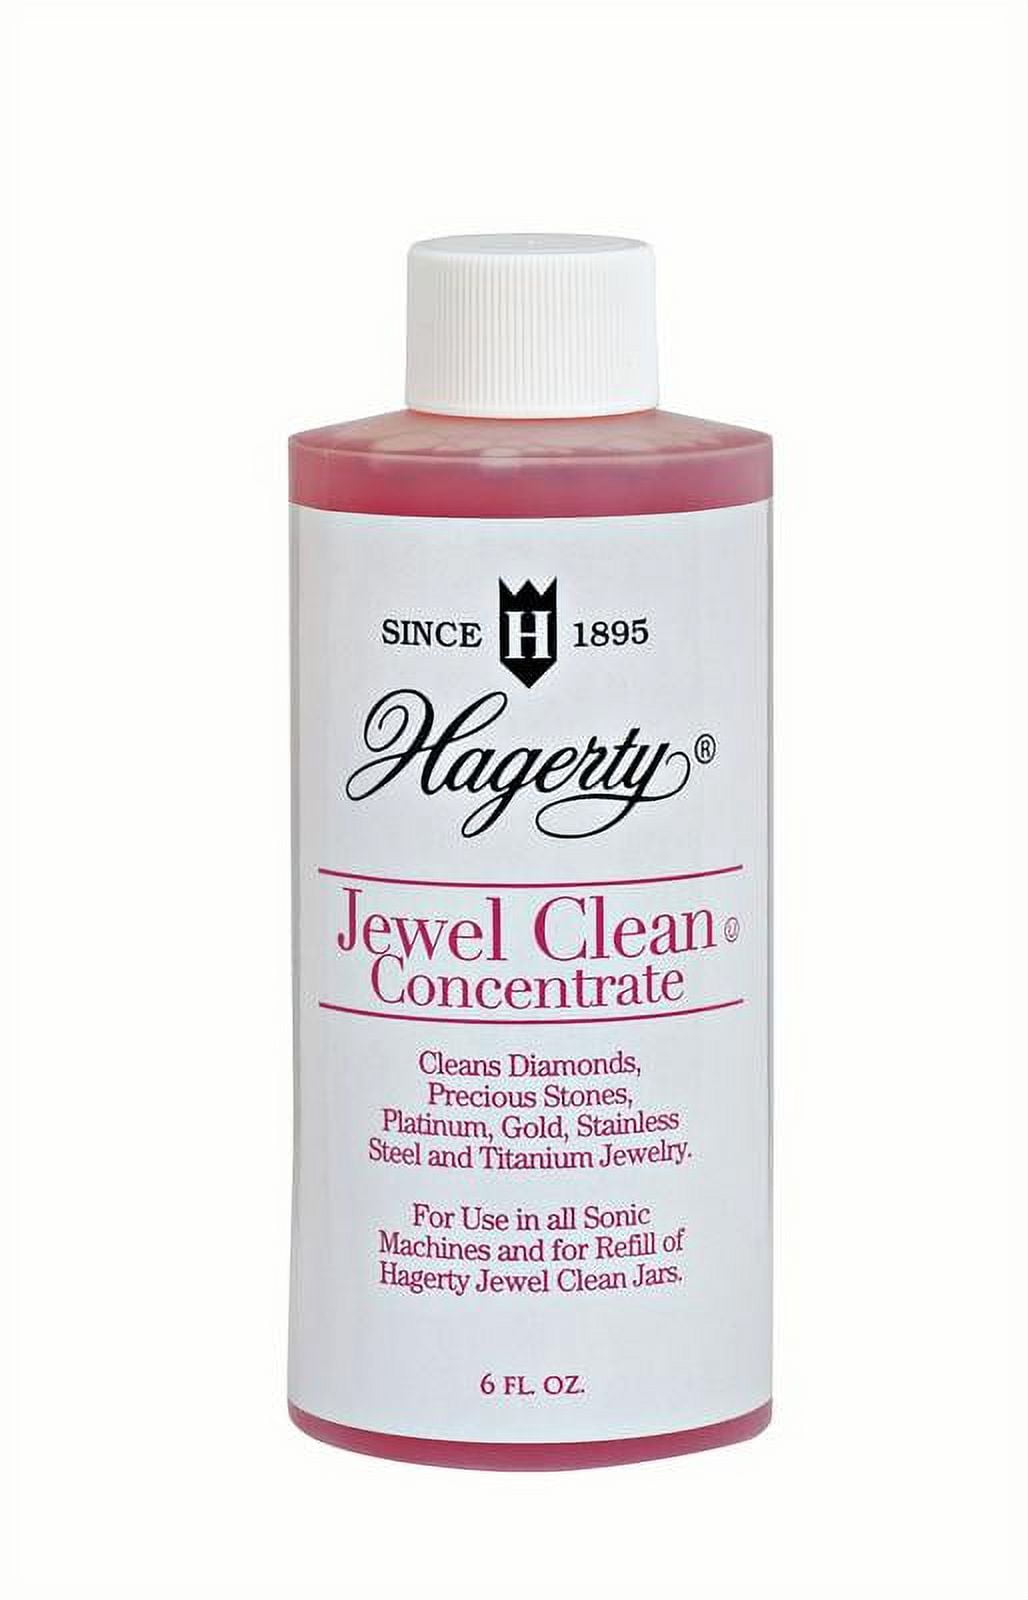 Jewel Clean - W. J. Hagerty & Sons